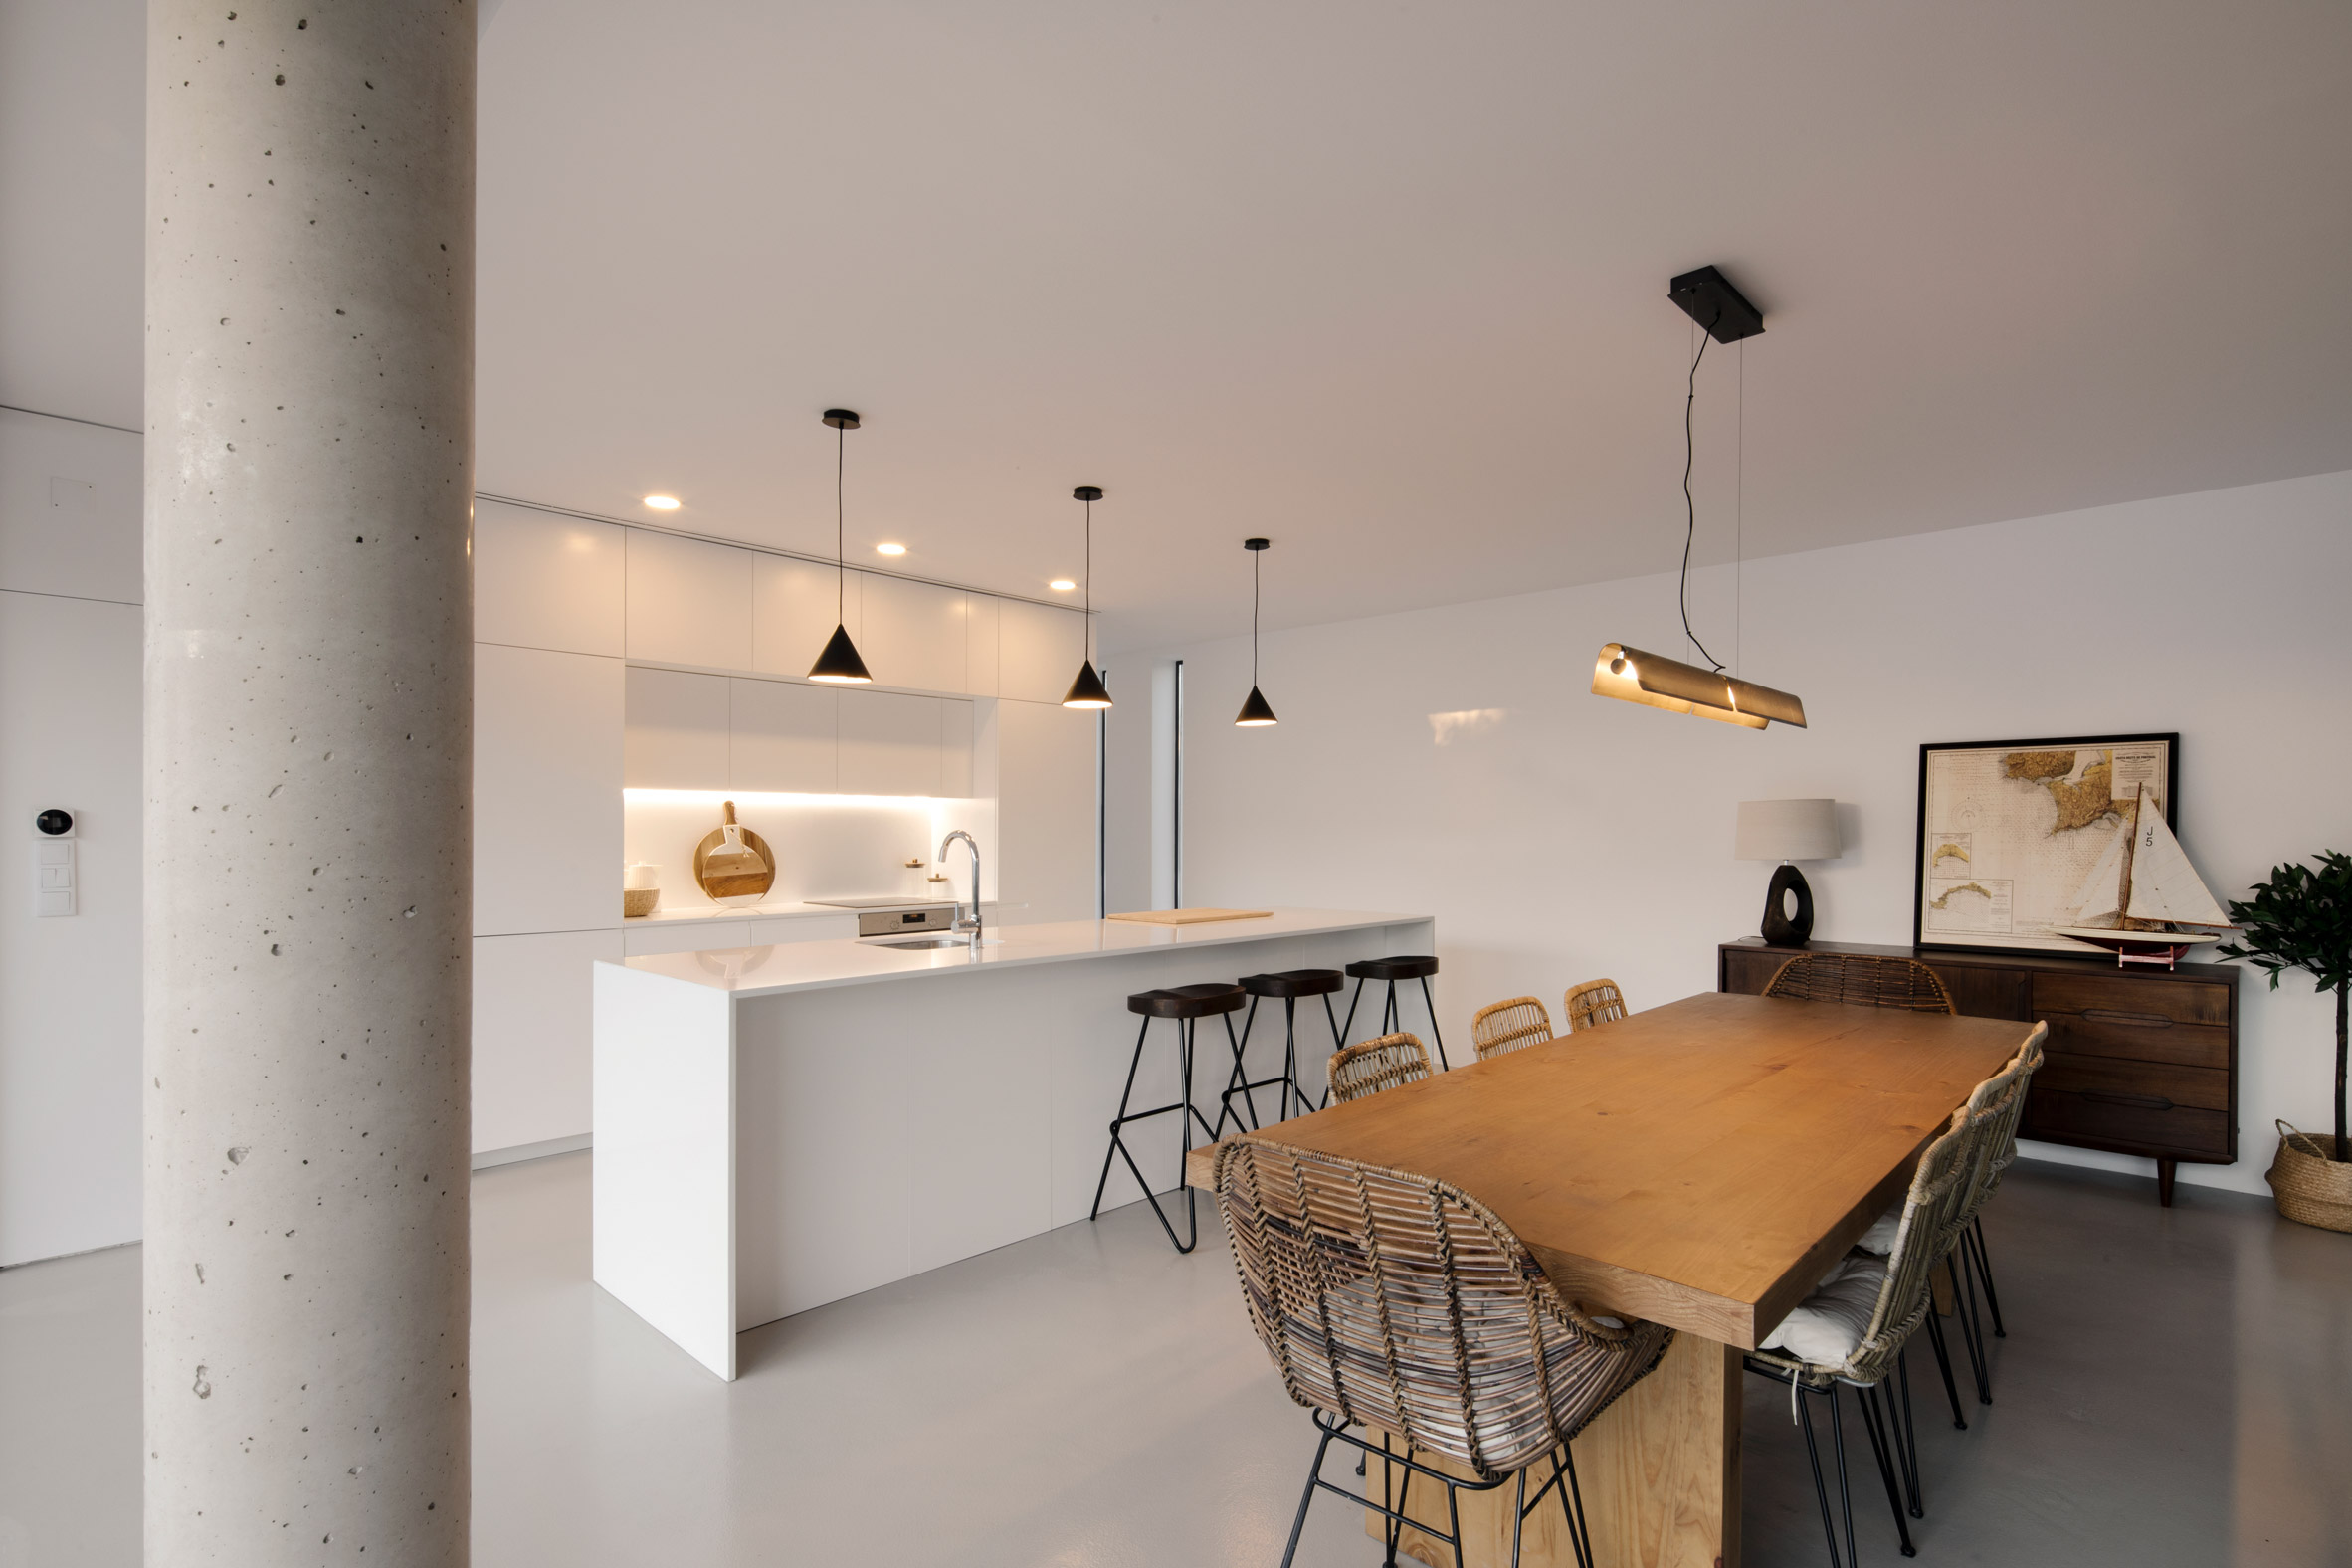 The kitchen of the Portuguese house by Inês Brandão Arquitectura